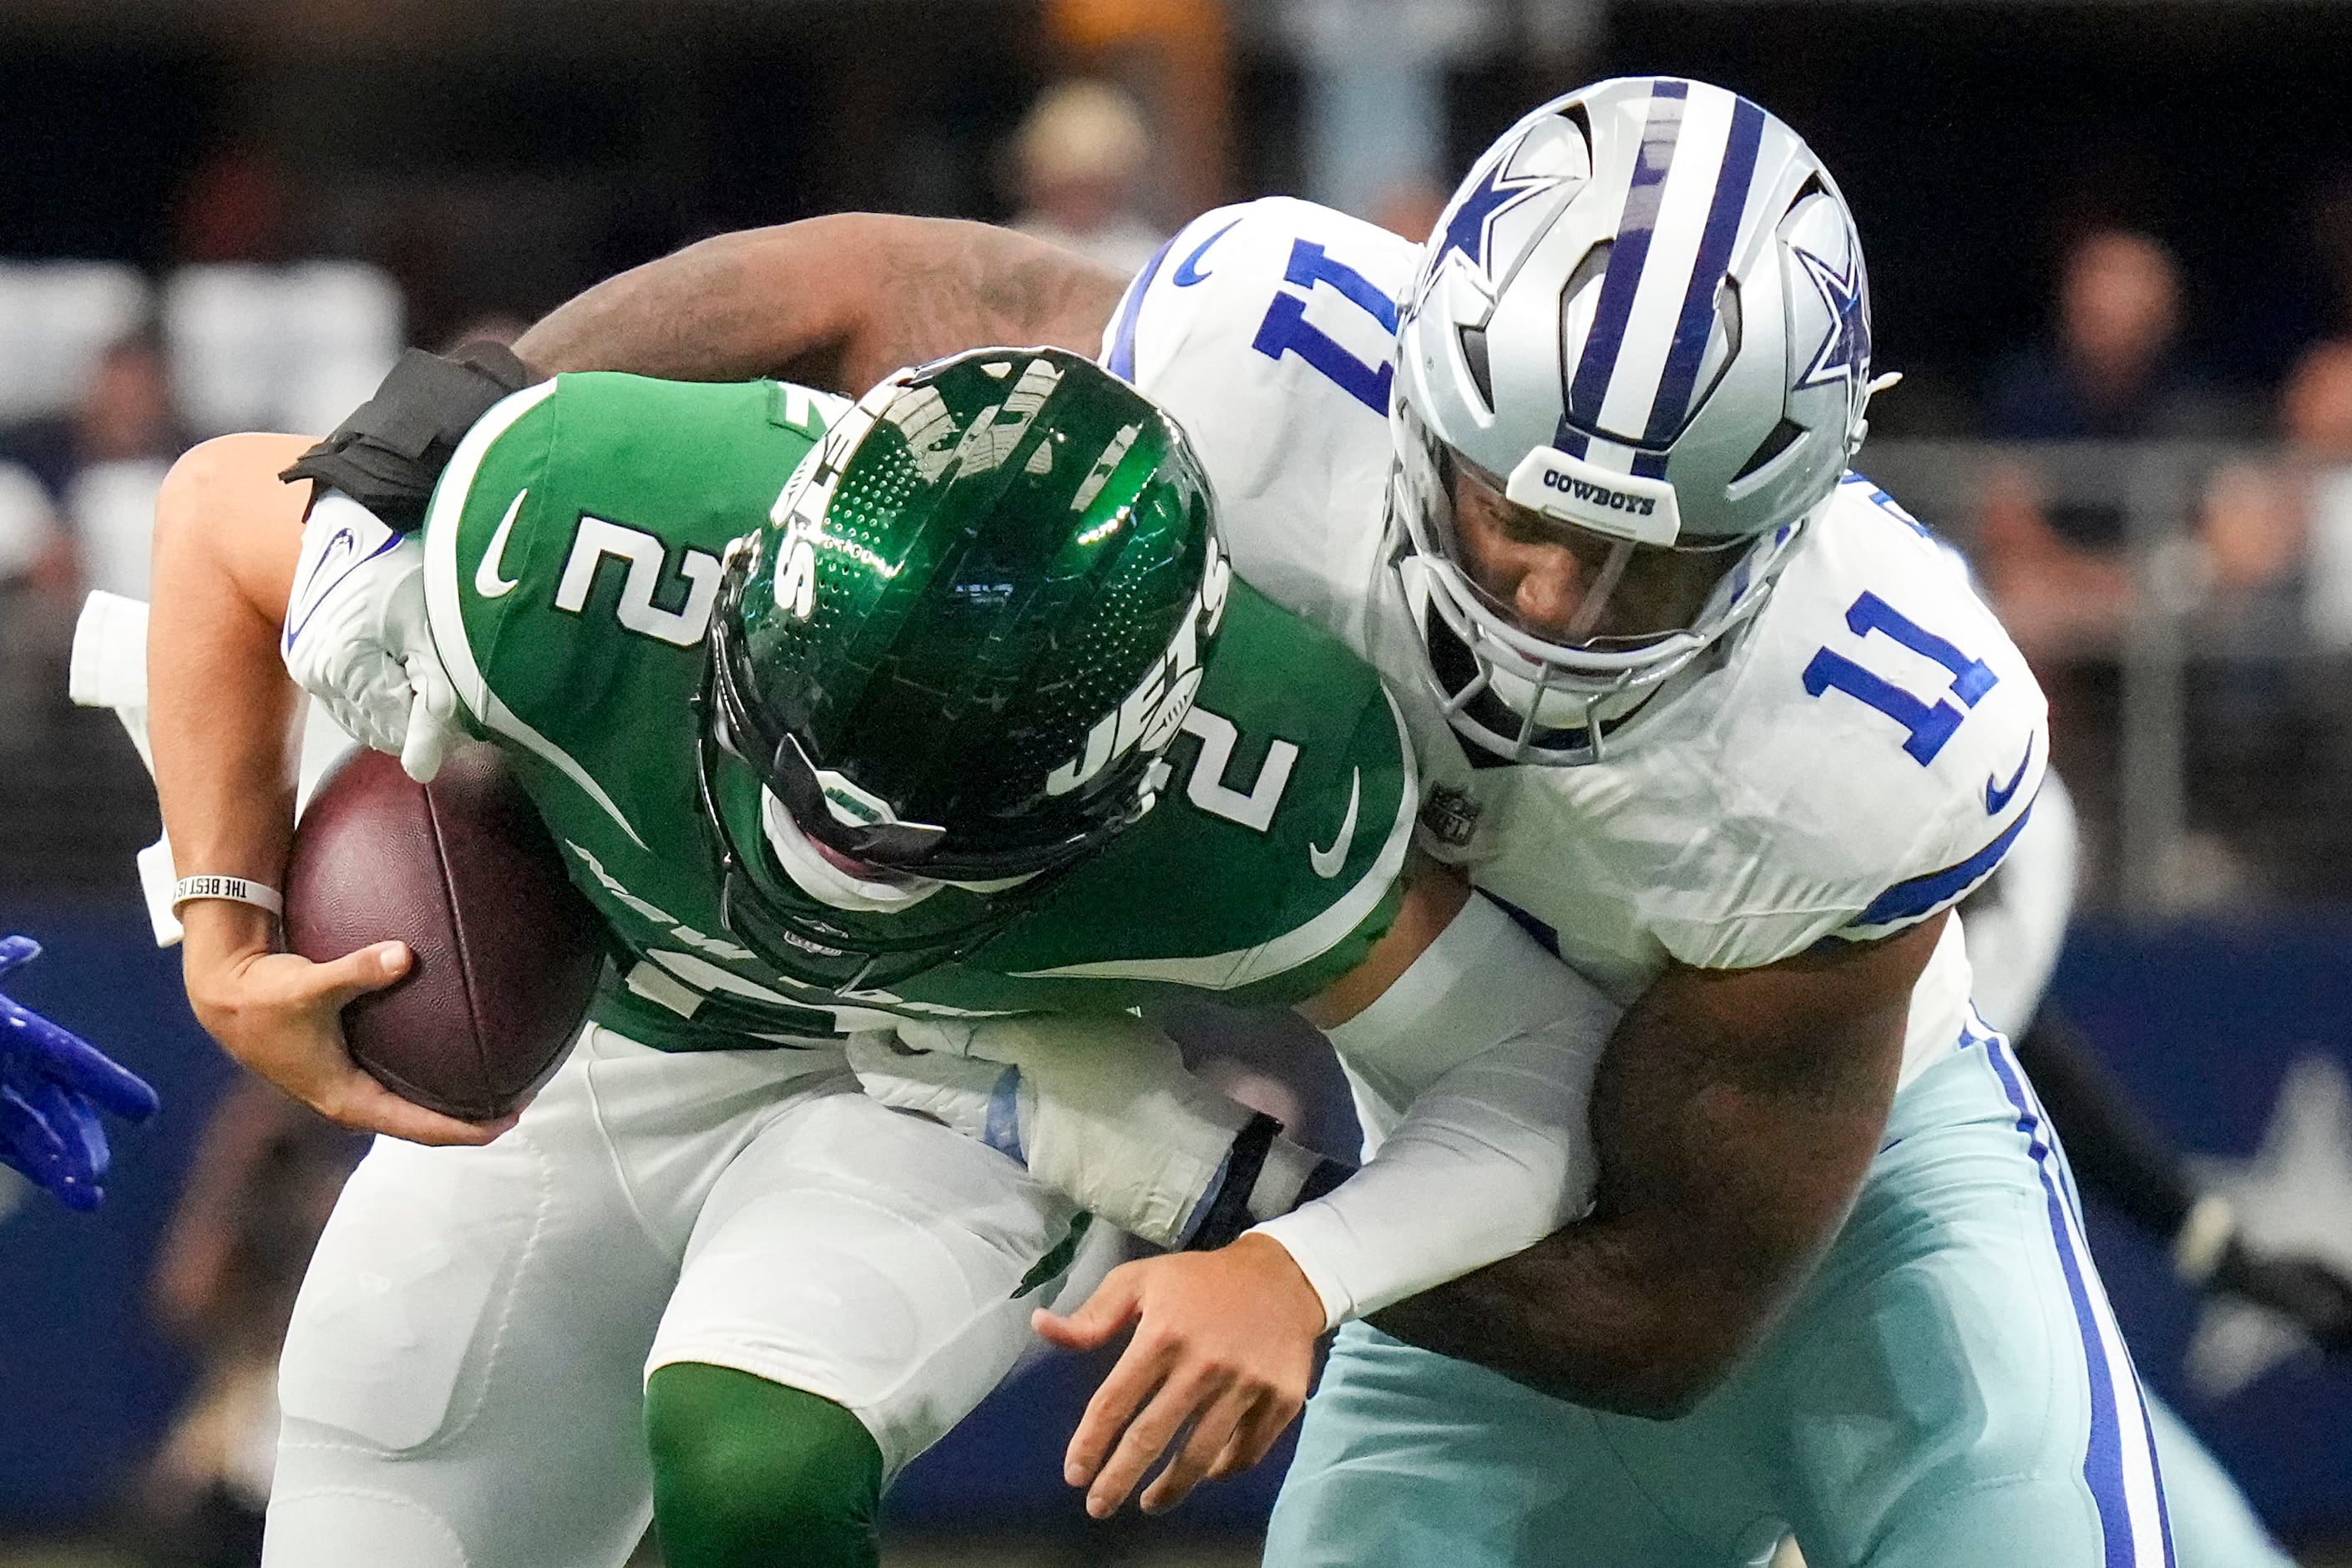 How to watch the New York Jets vs. Dallas Cowboys game this